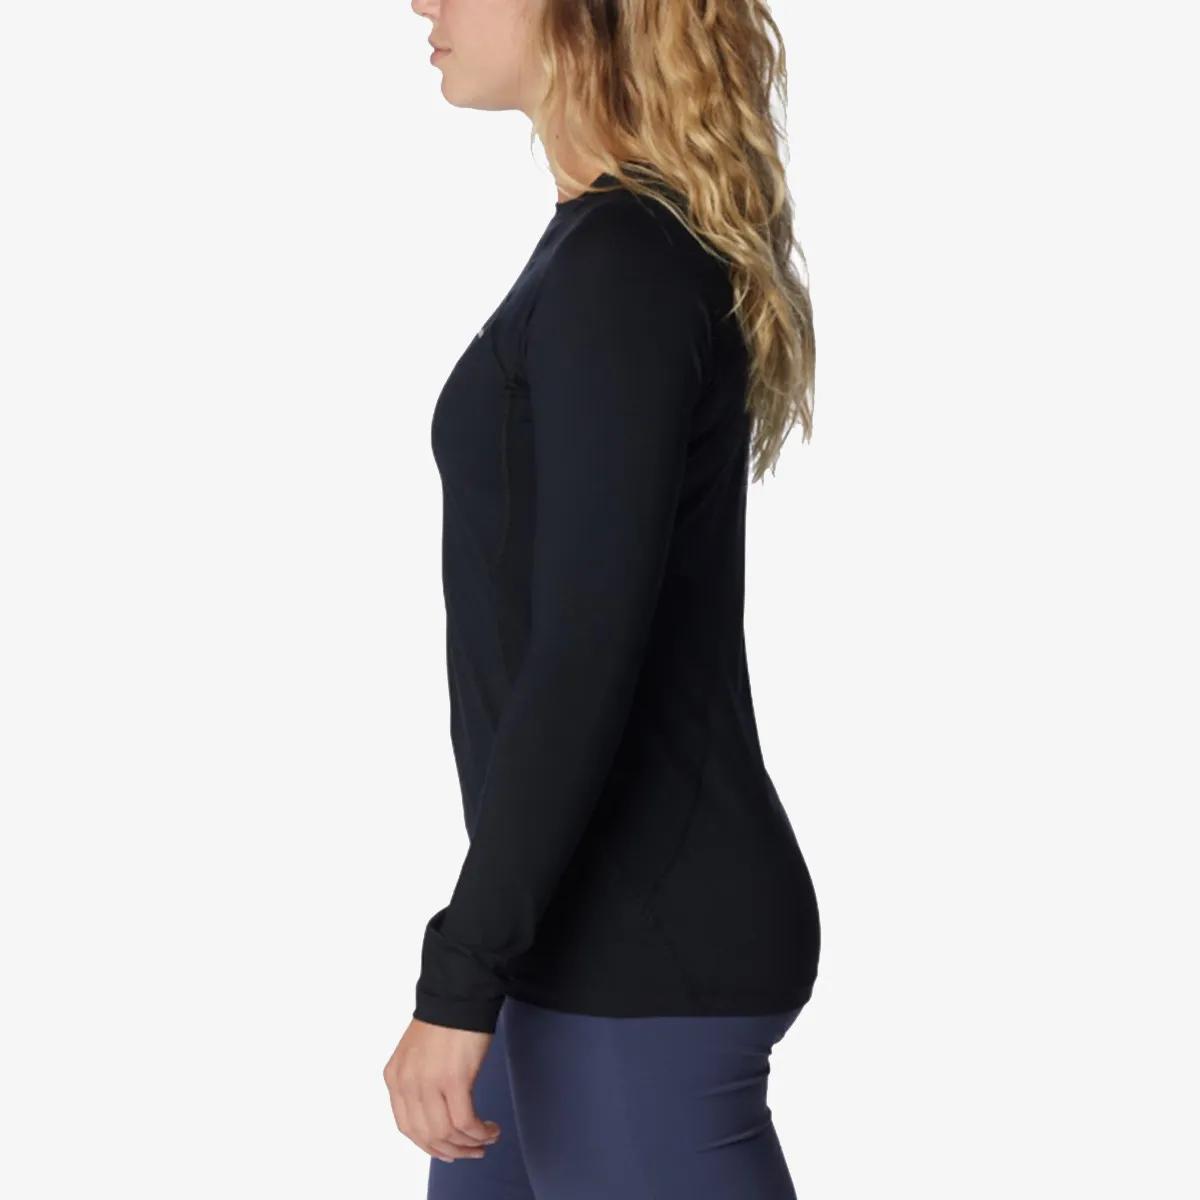 COLUMBIA Midweight Stretch Long Sleeve Top 